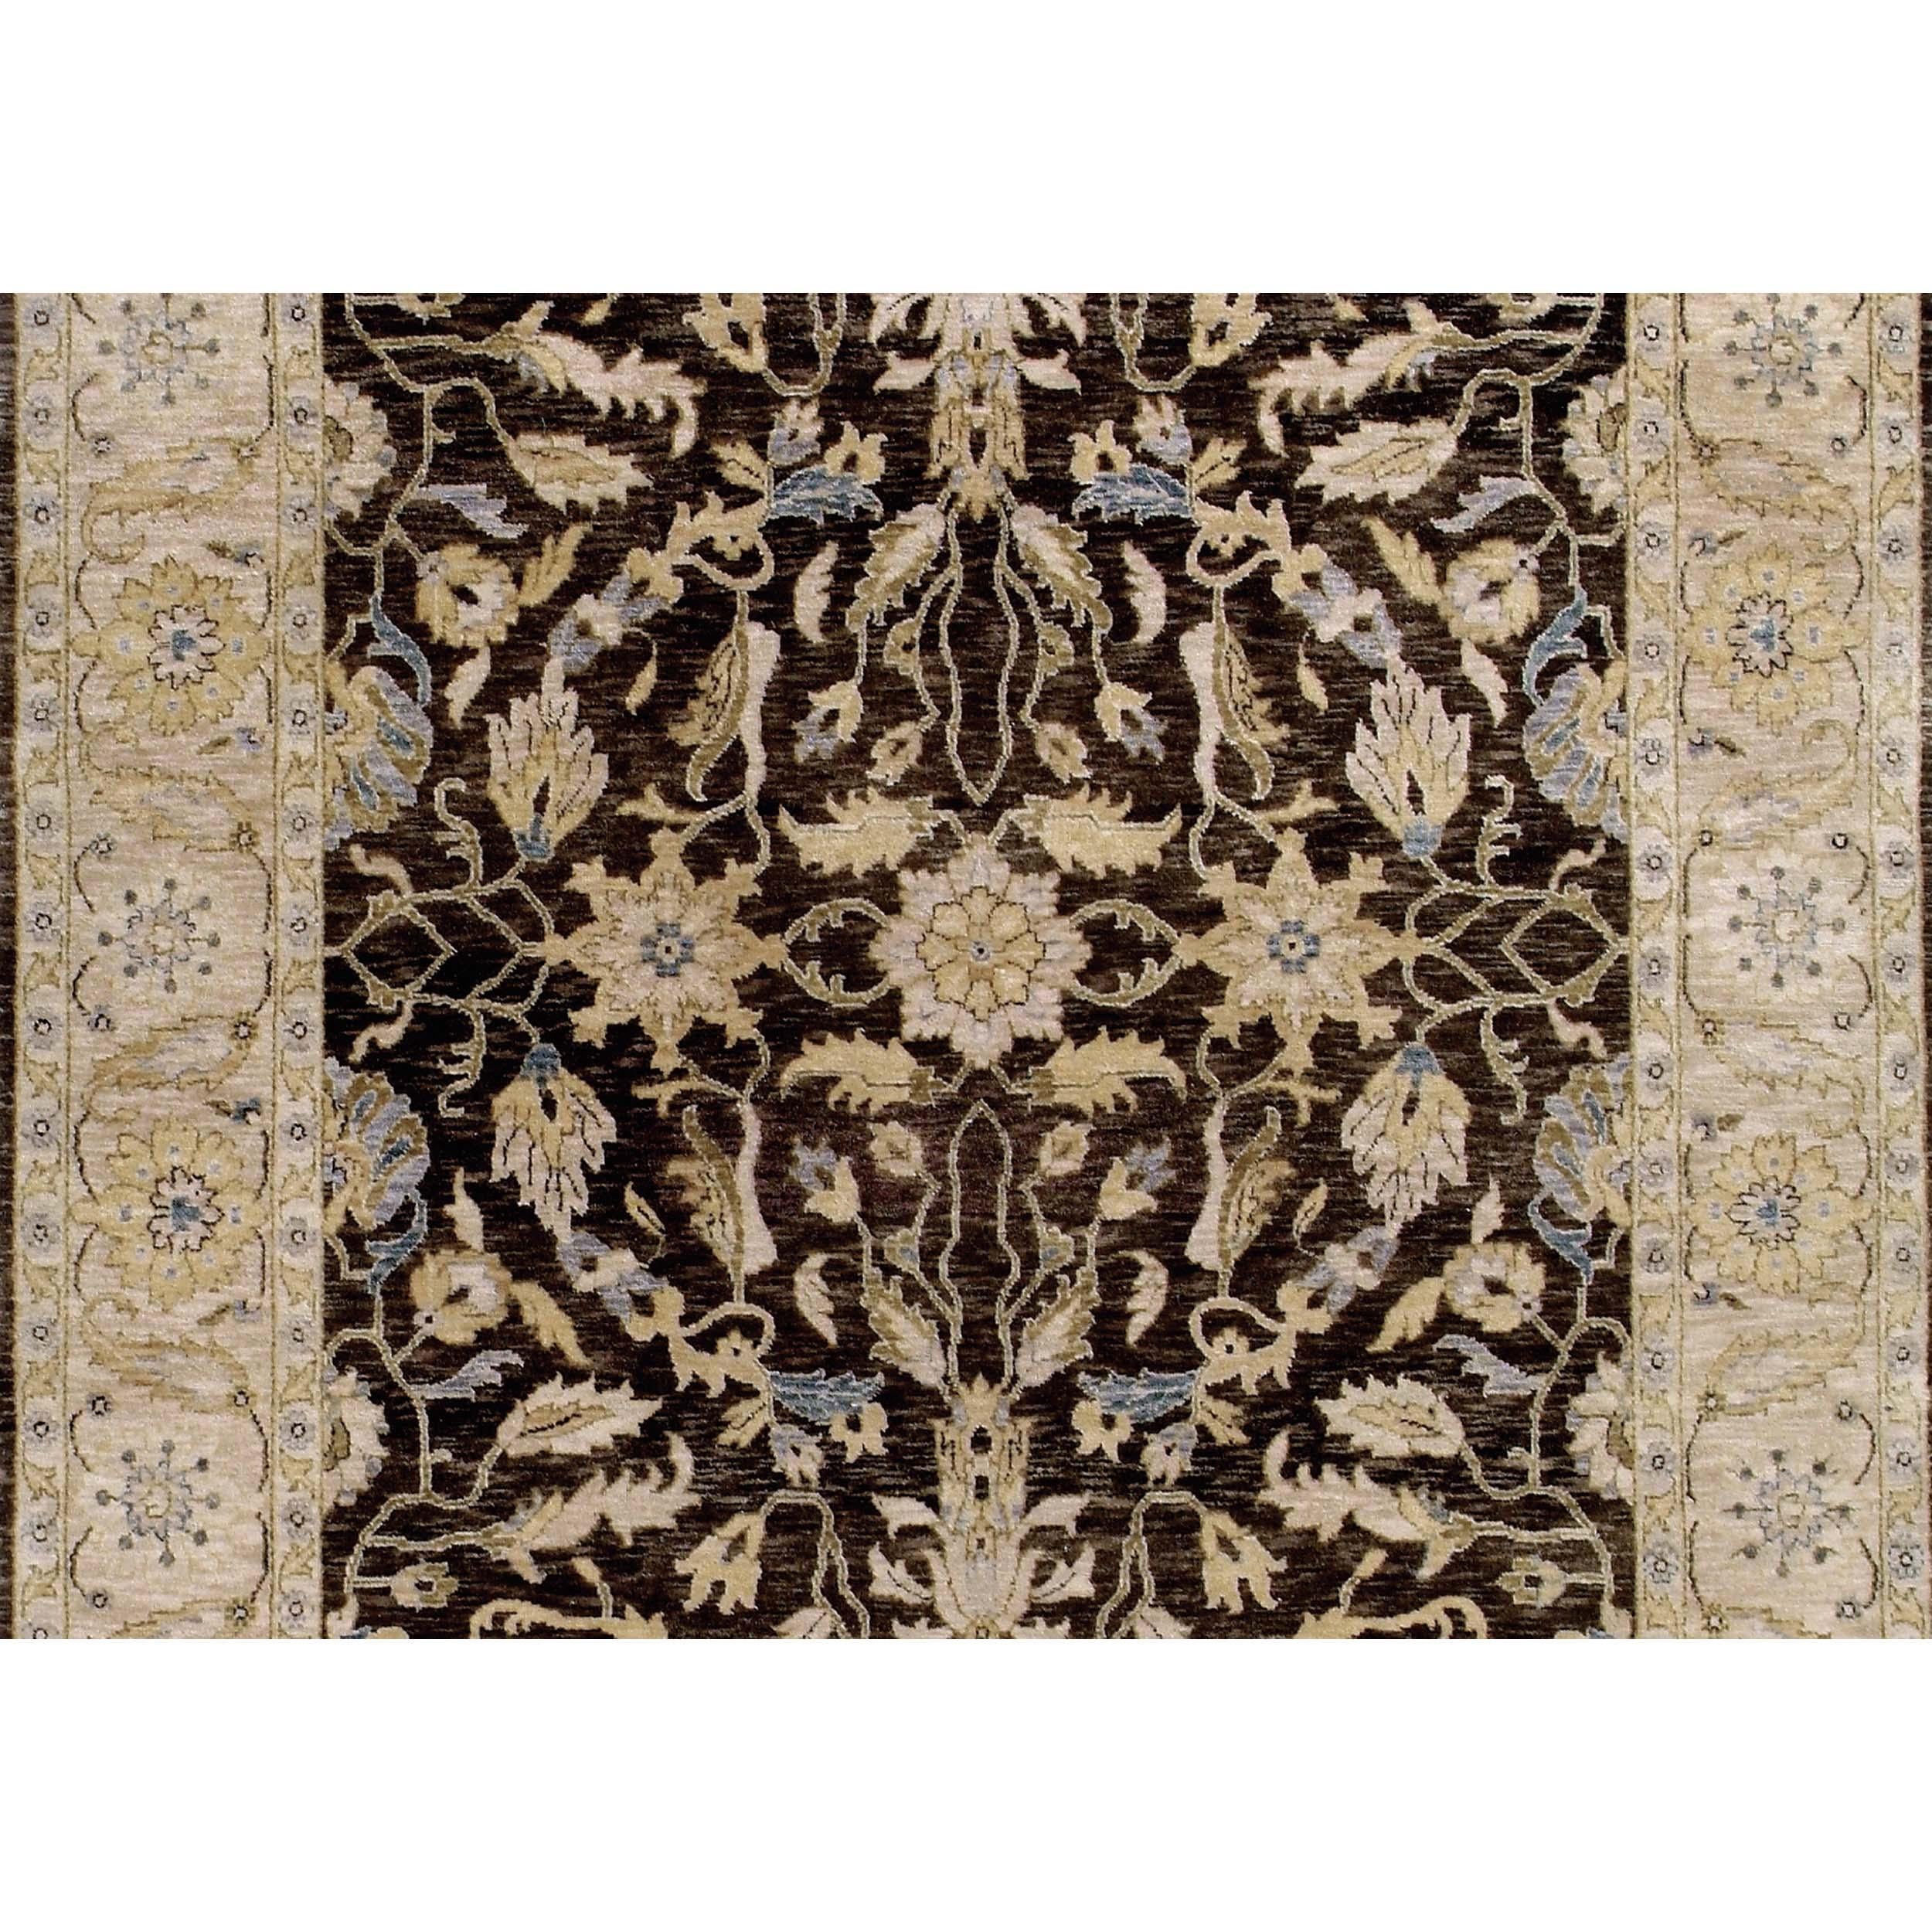 Large, exaggerated village carpet designs with a warm tonal palette. Each hue is carefully curated, contributing to a symphony of warmth that transforms any space into a haven of coziness and style. This carpet, produced in India, boasts a high